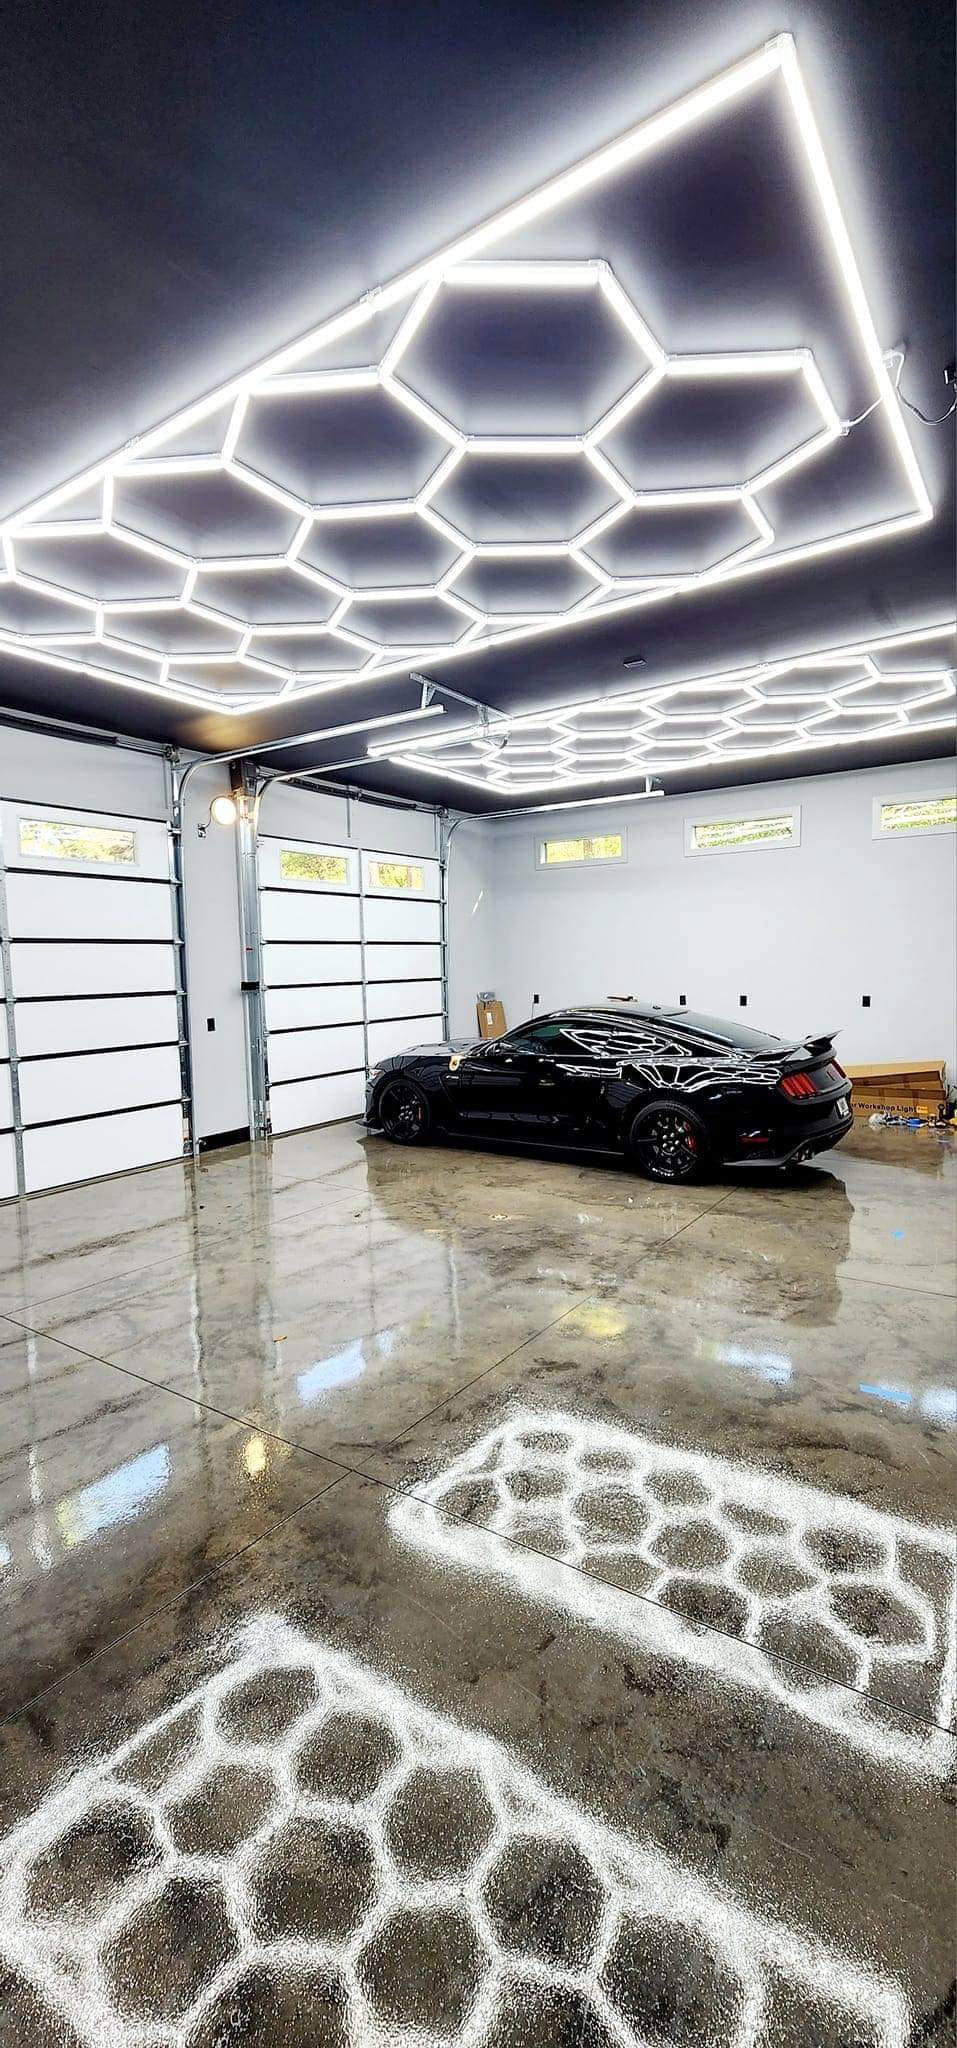 Brighter Side Lighting HIVE Hexagon LED Lighting with Border in Garage with Ford Mustang